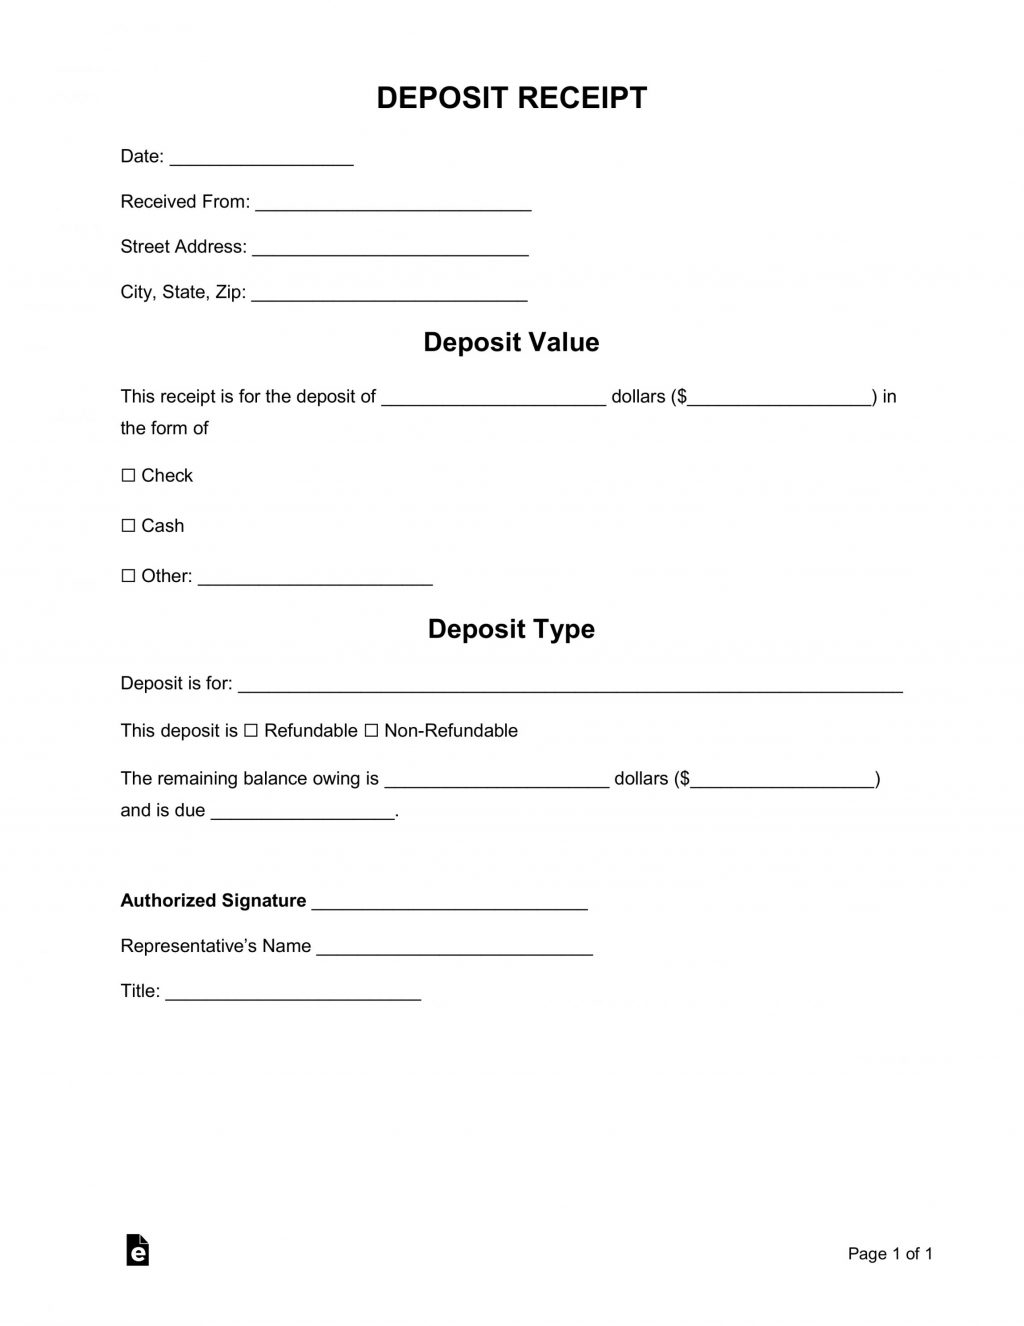 Refundable Deposit Agreement Example For Refundable Deposit Agreement Template Throughout Refundable Deposit Agreement Template